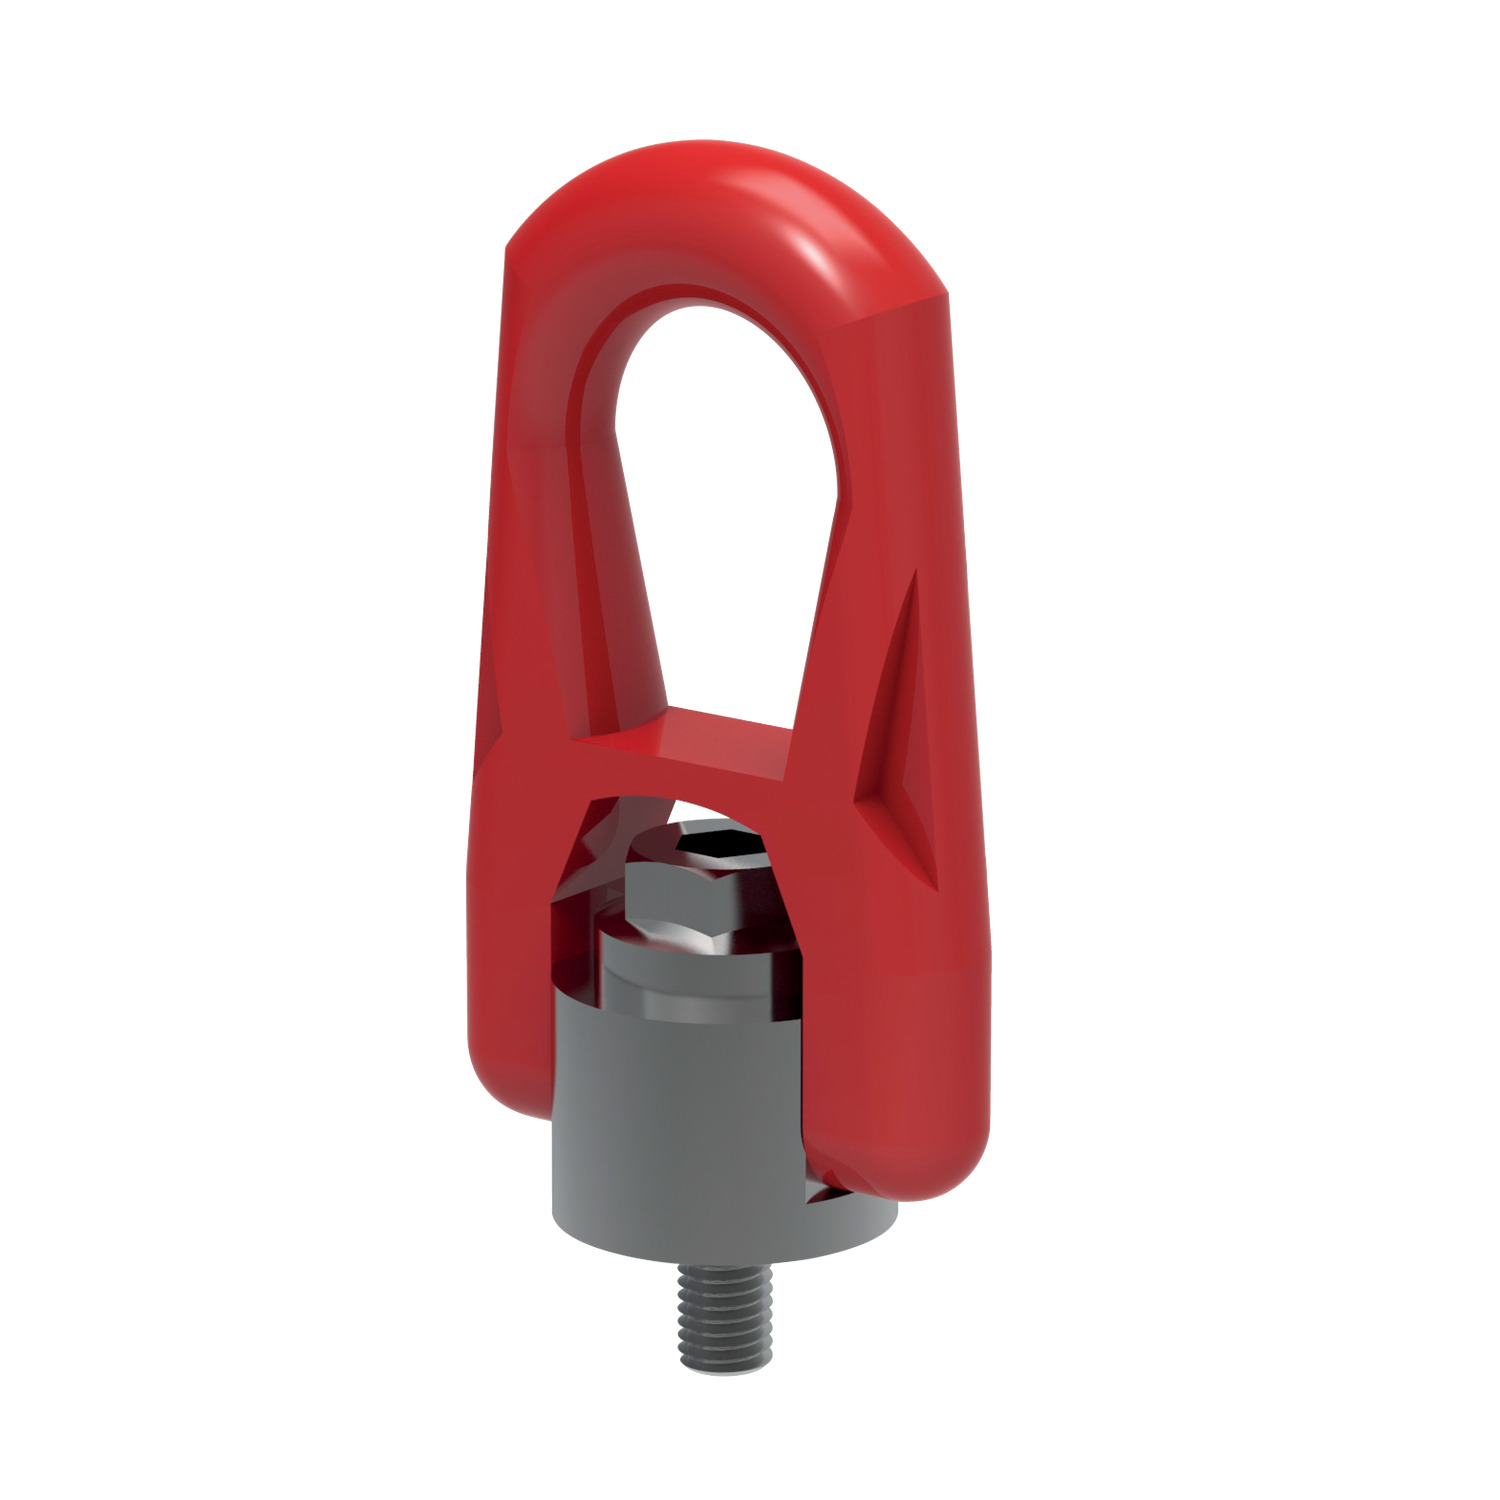 Double Swivel Rings Male Double swivel lifting rings M4 to M30 - loads up to 6.3 tons per ring.